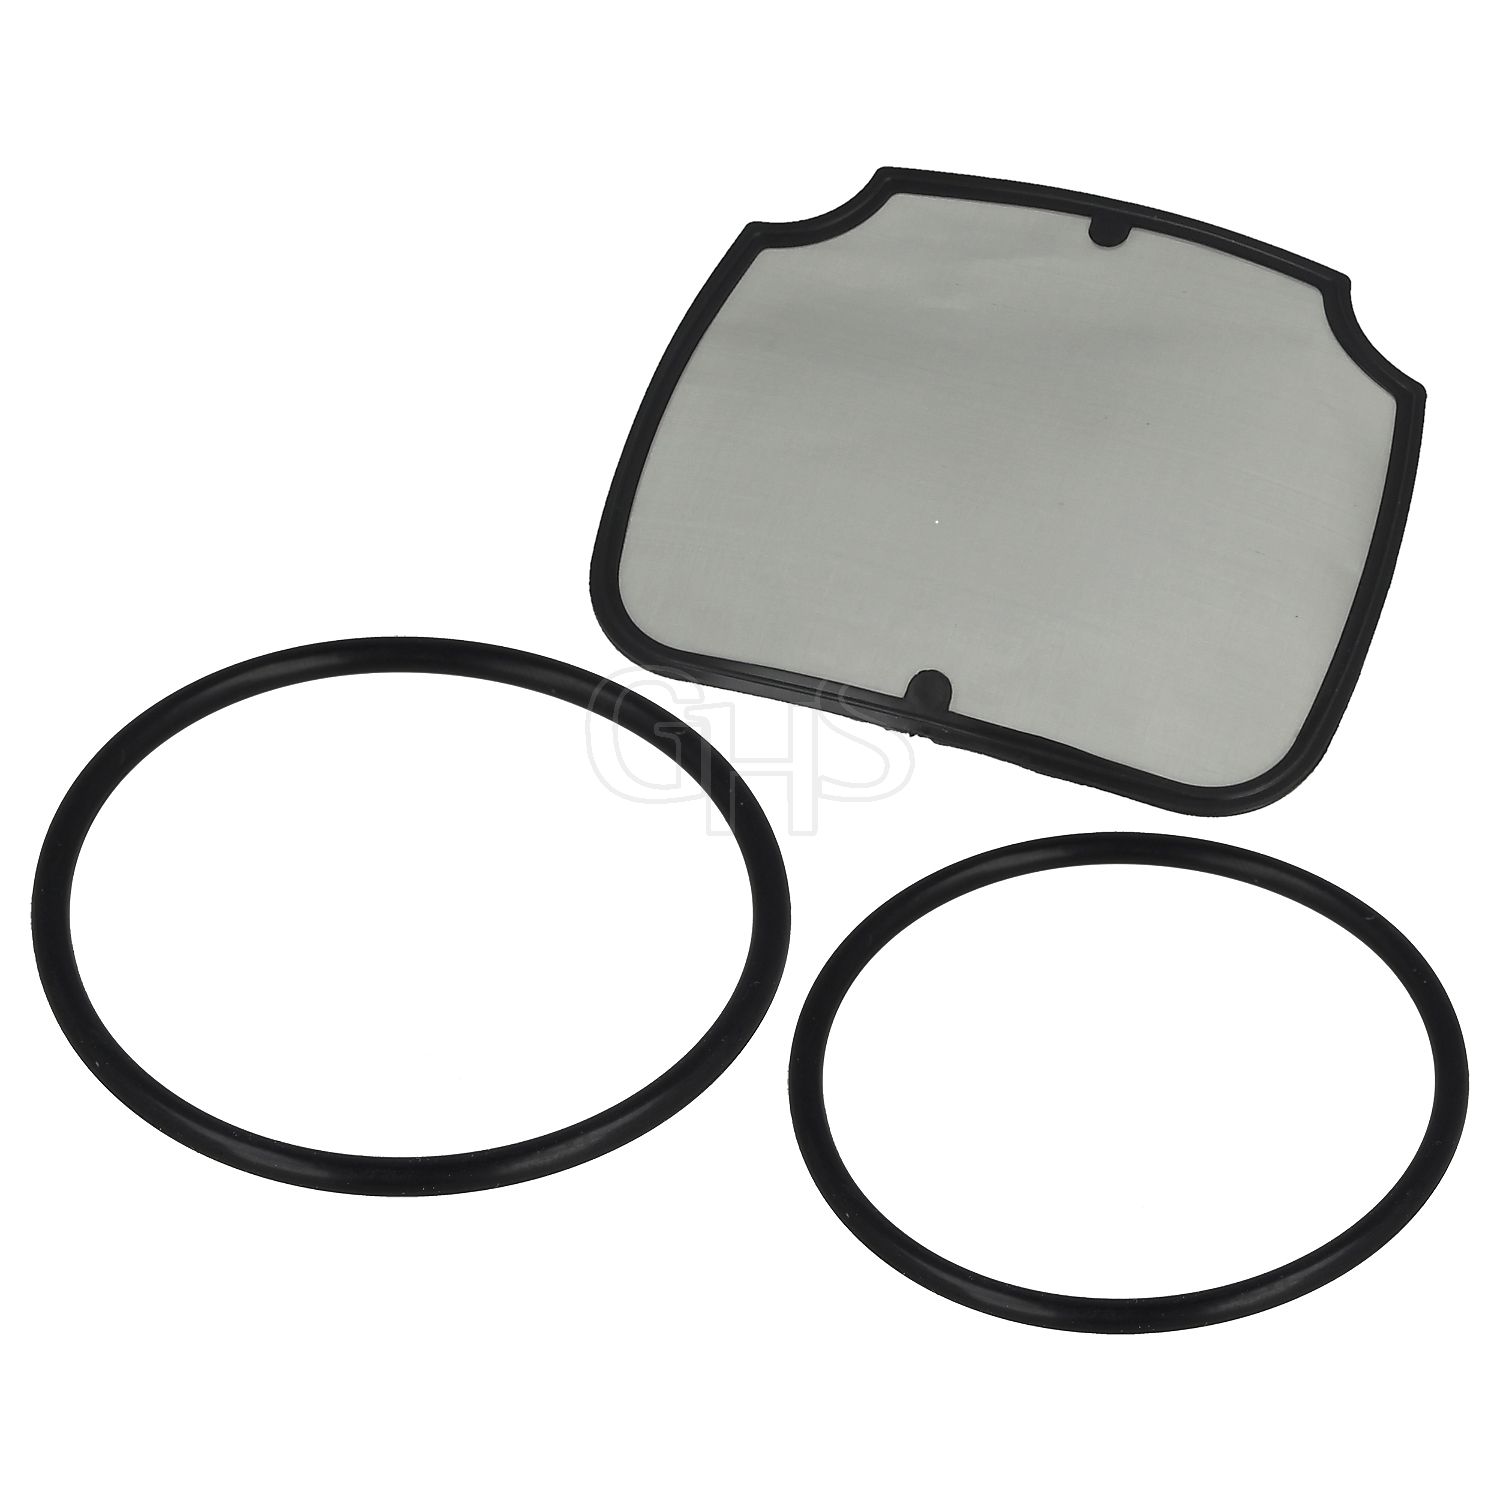 GENUINE HIGH QUALITY PART O RING IM350-403992 PASLODE SPARE PARTS 